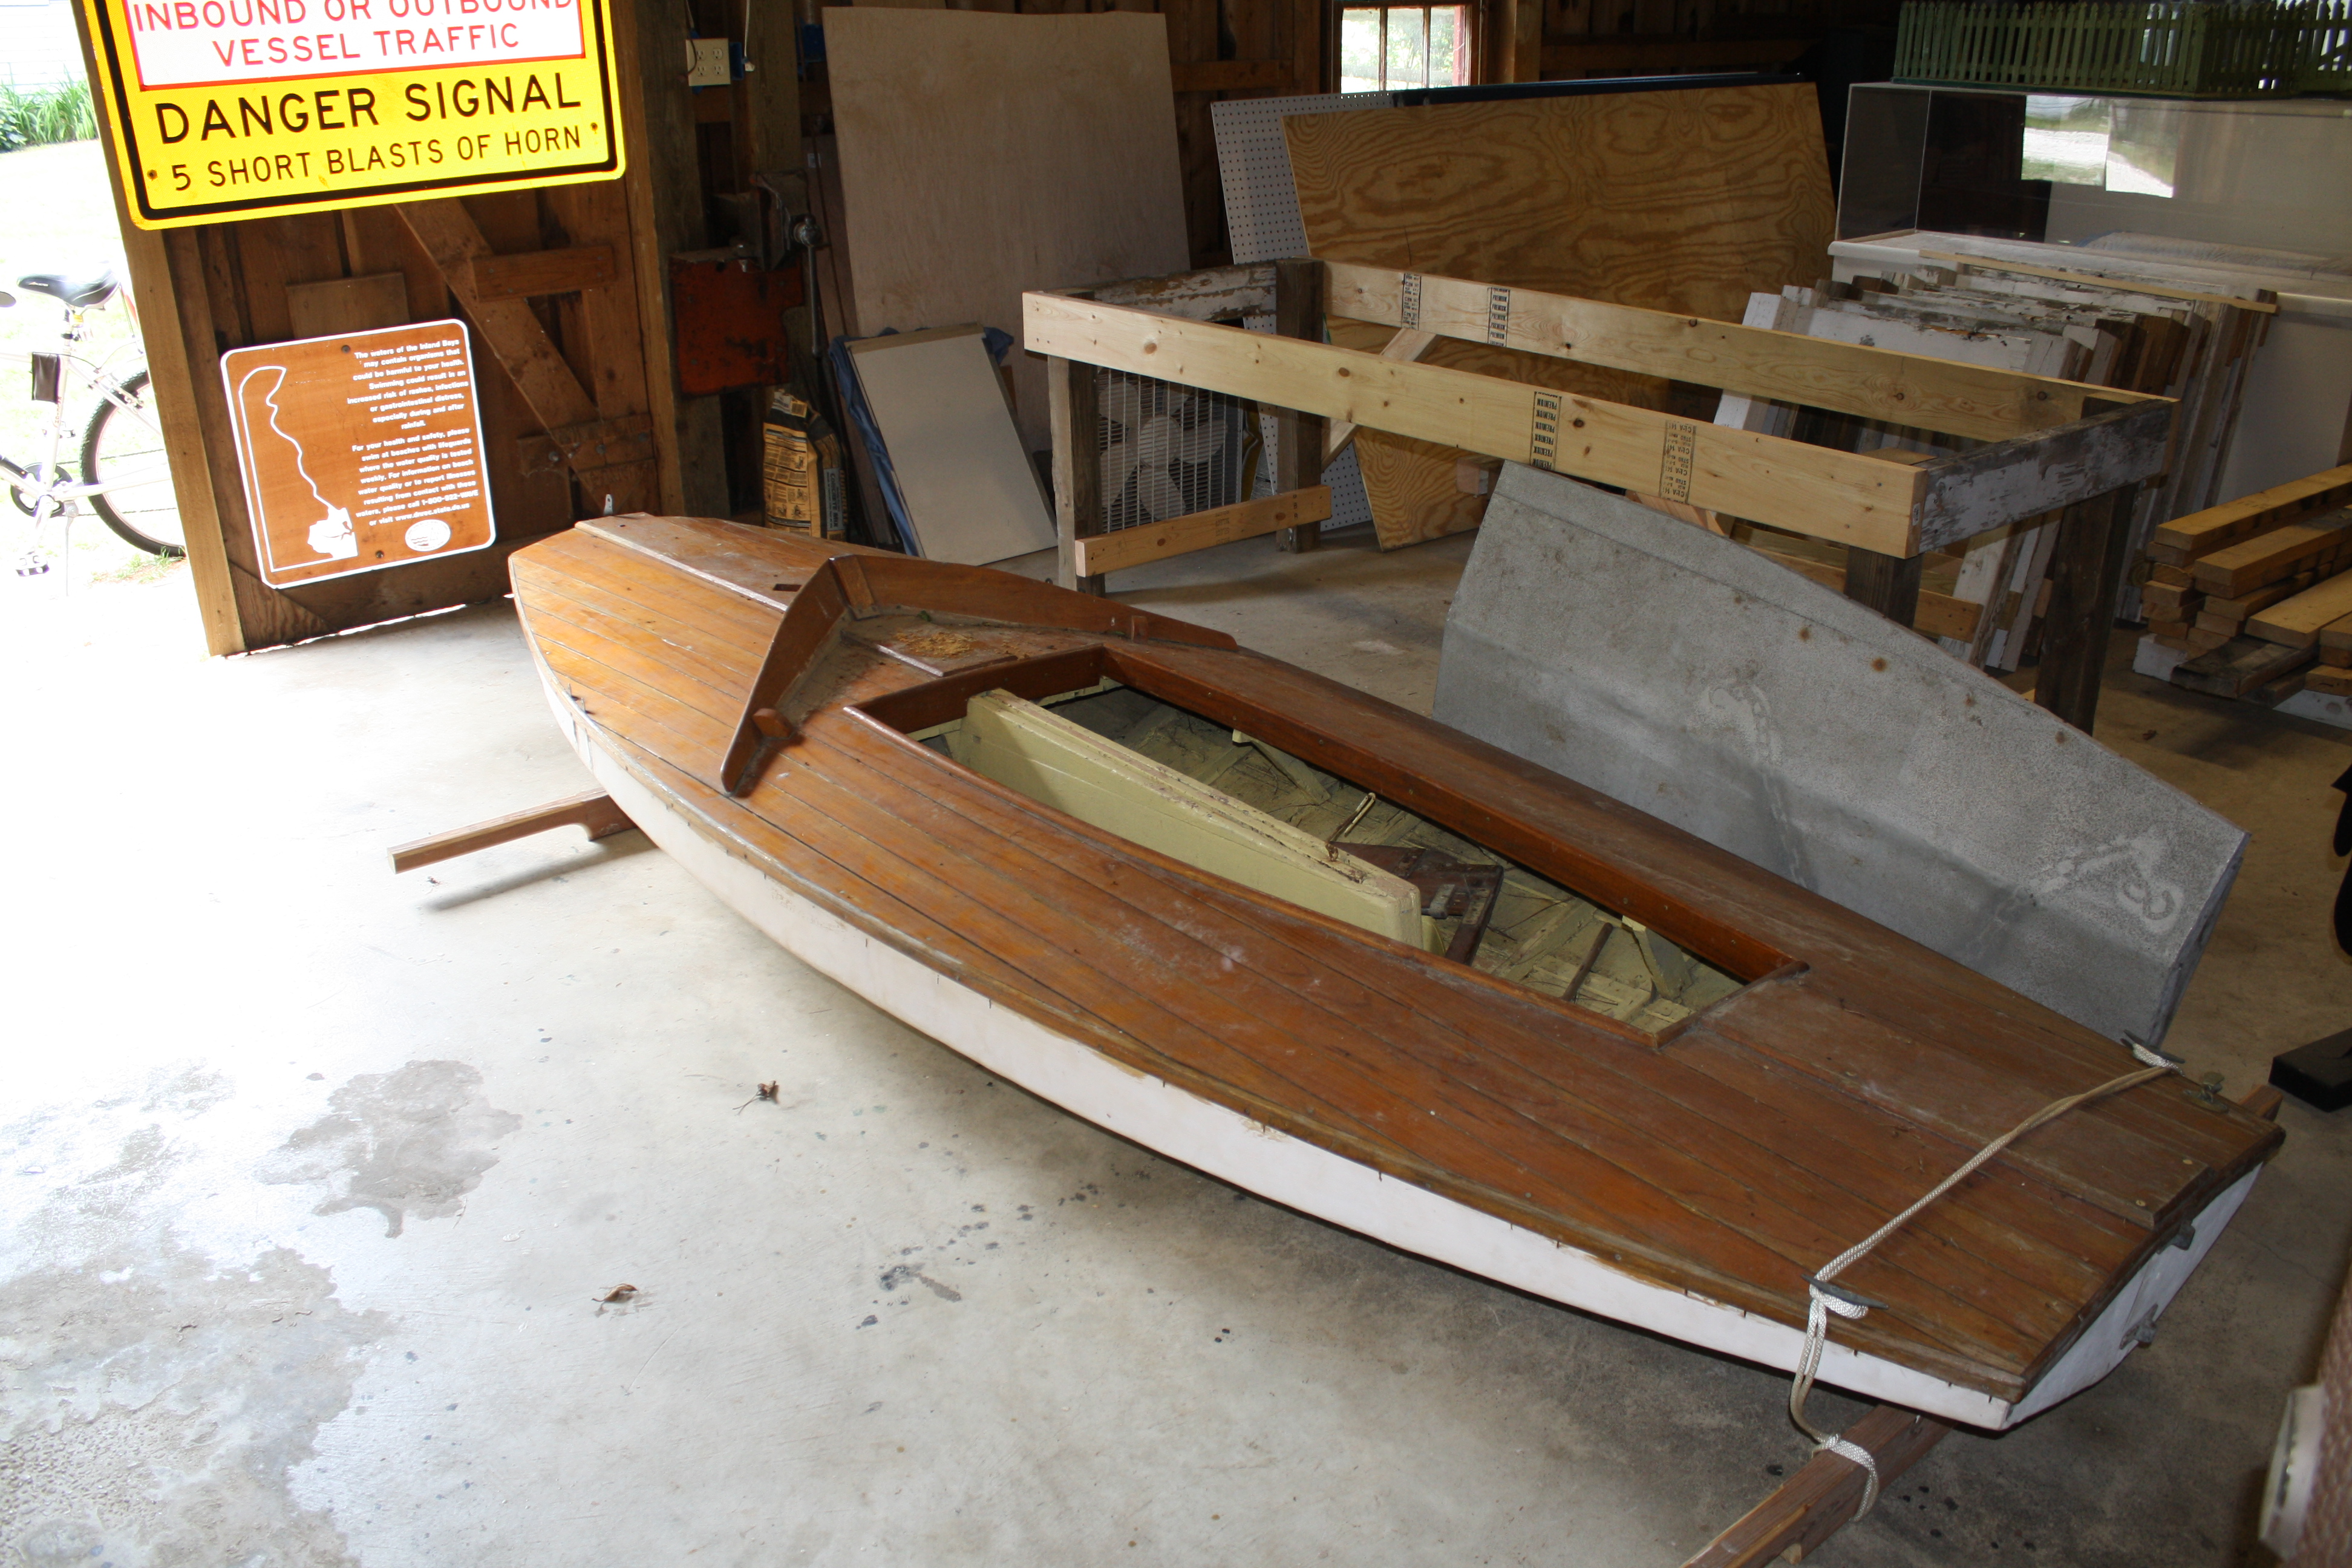 wooden boat program The Lewes Memory Project